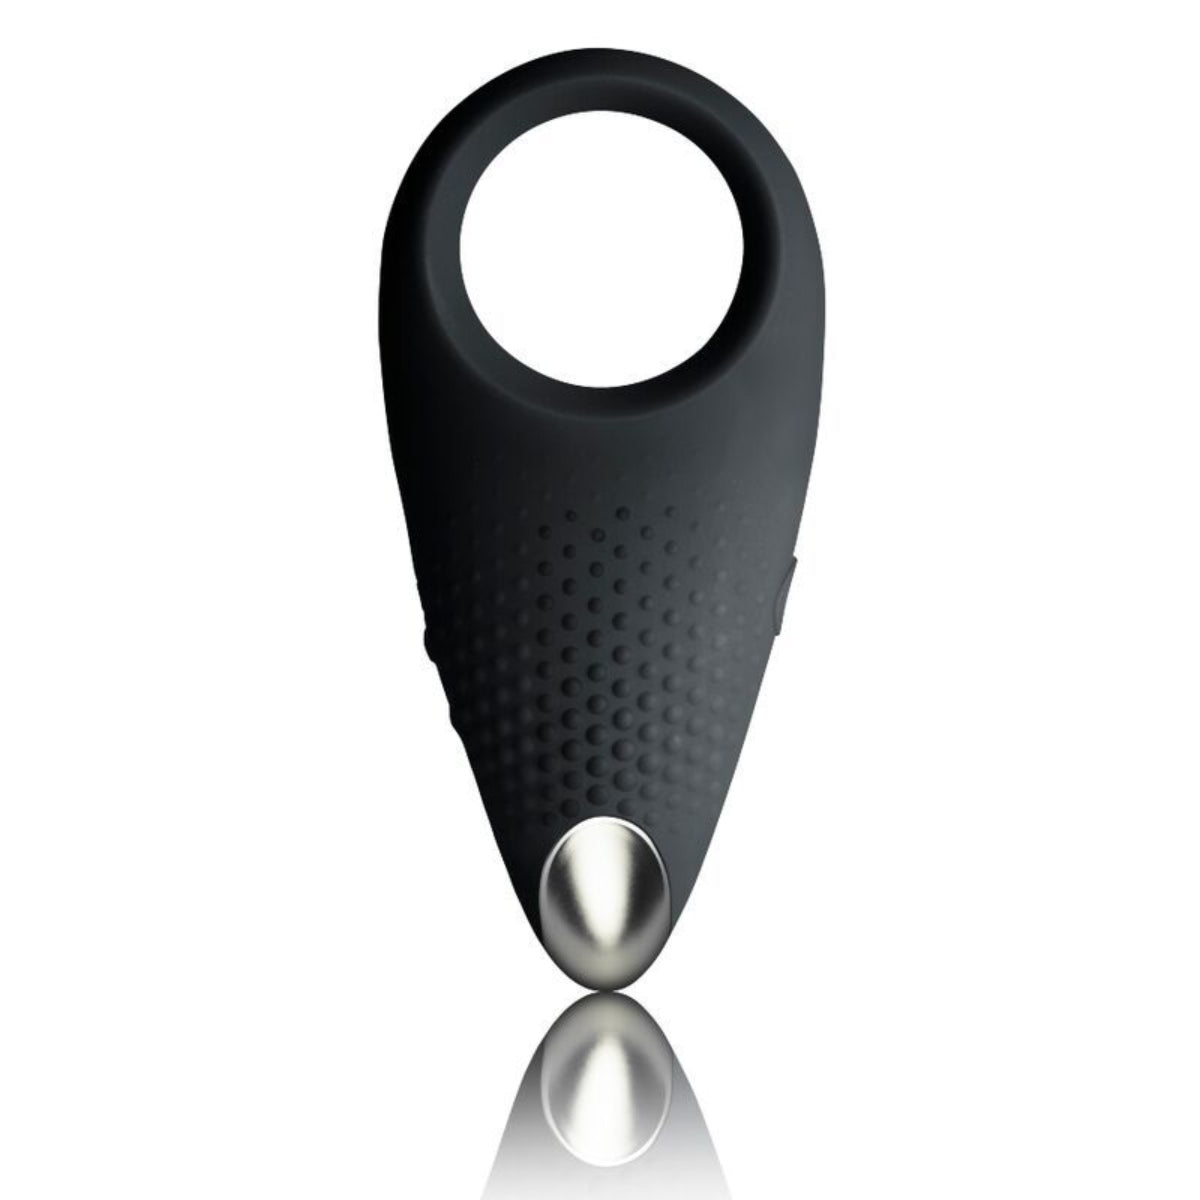 Cock Dangler Silicone Penis Strap With Weights - Black